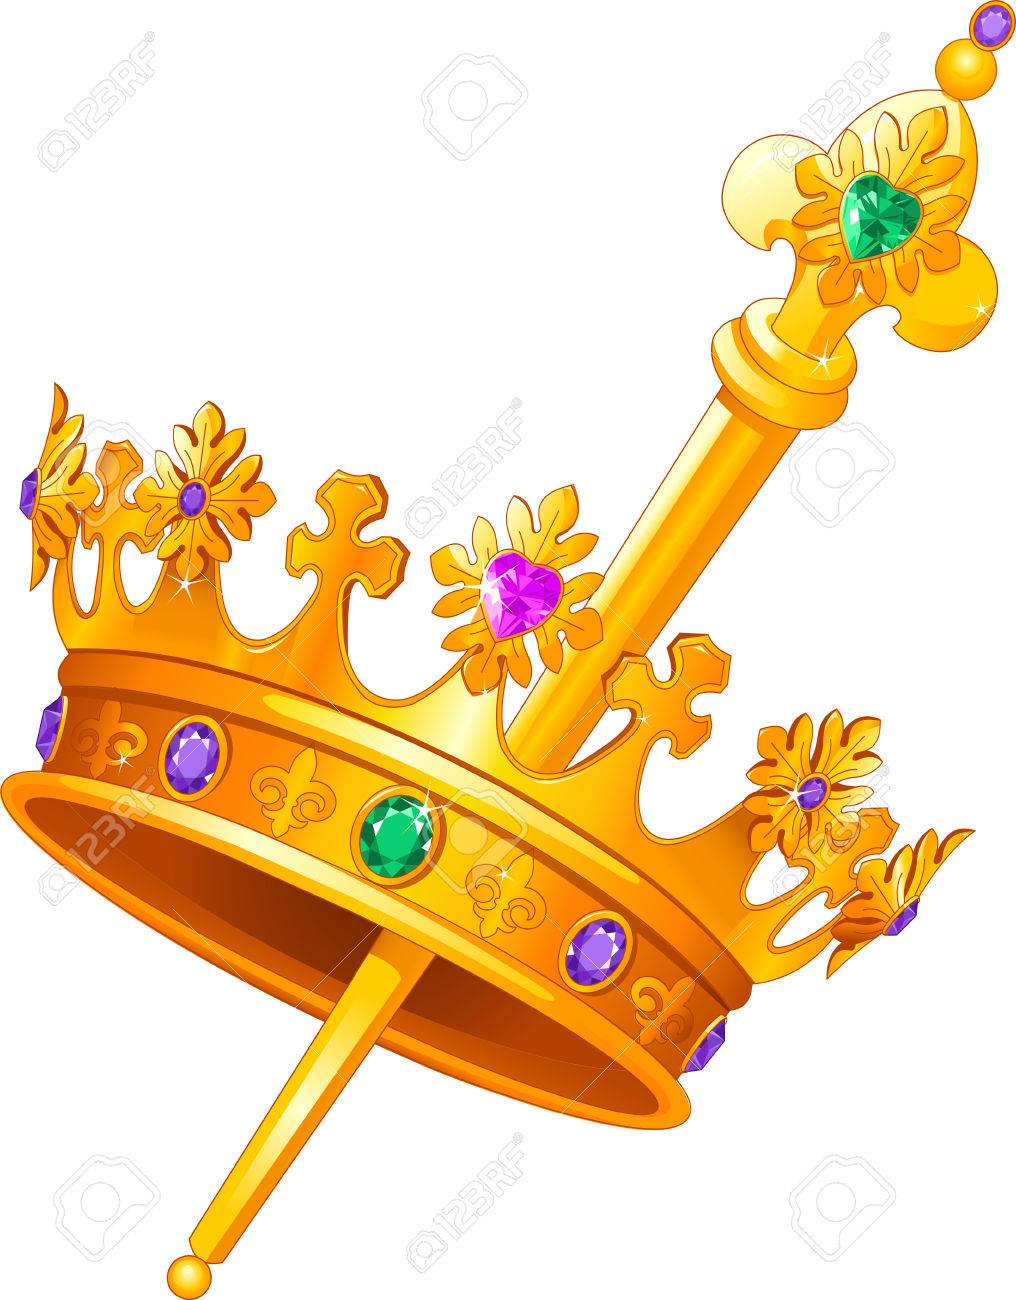 Crown And Scepter Clipart.